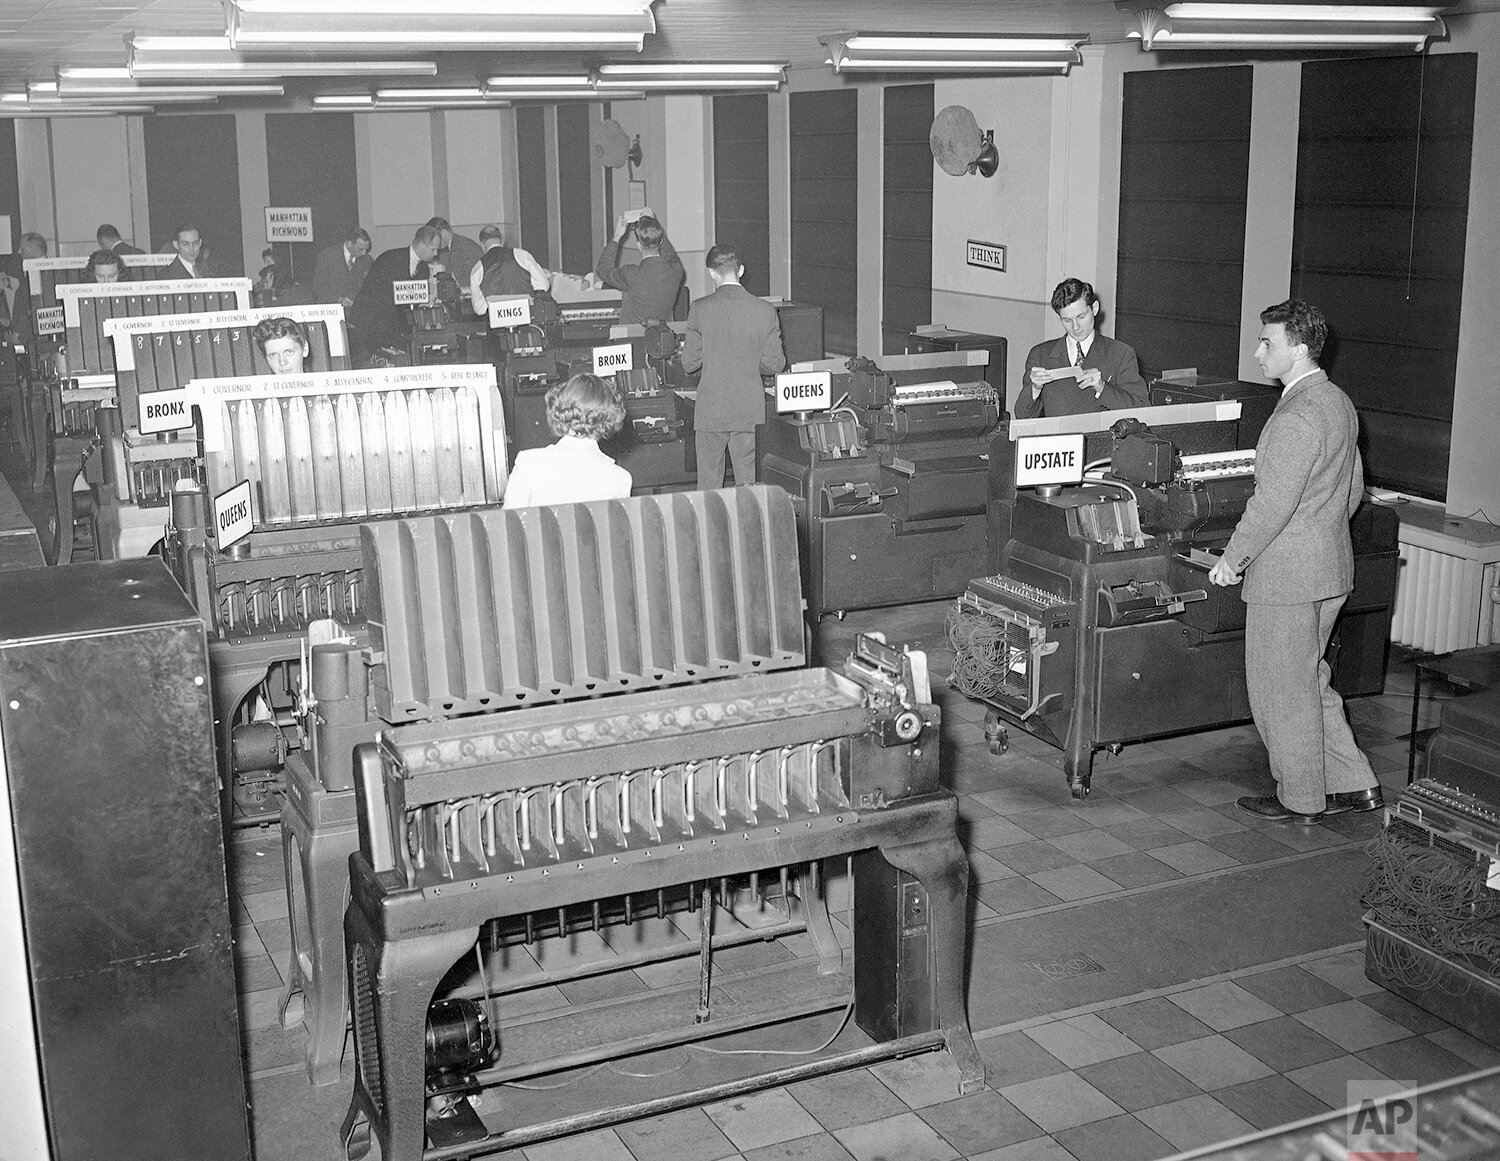  This battery of tabulating machines plays an important part in the gathering of the election returns by the Associated Press in New York, Nov. 3, 1942. The returns, coming in by teletype, are classified and counted with the aid of these and other ma